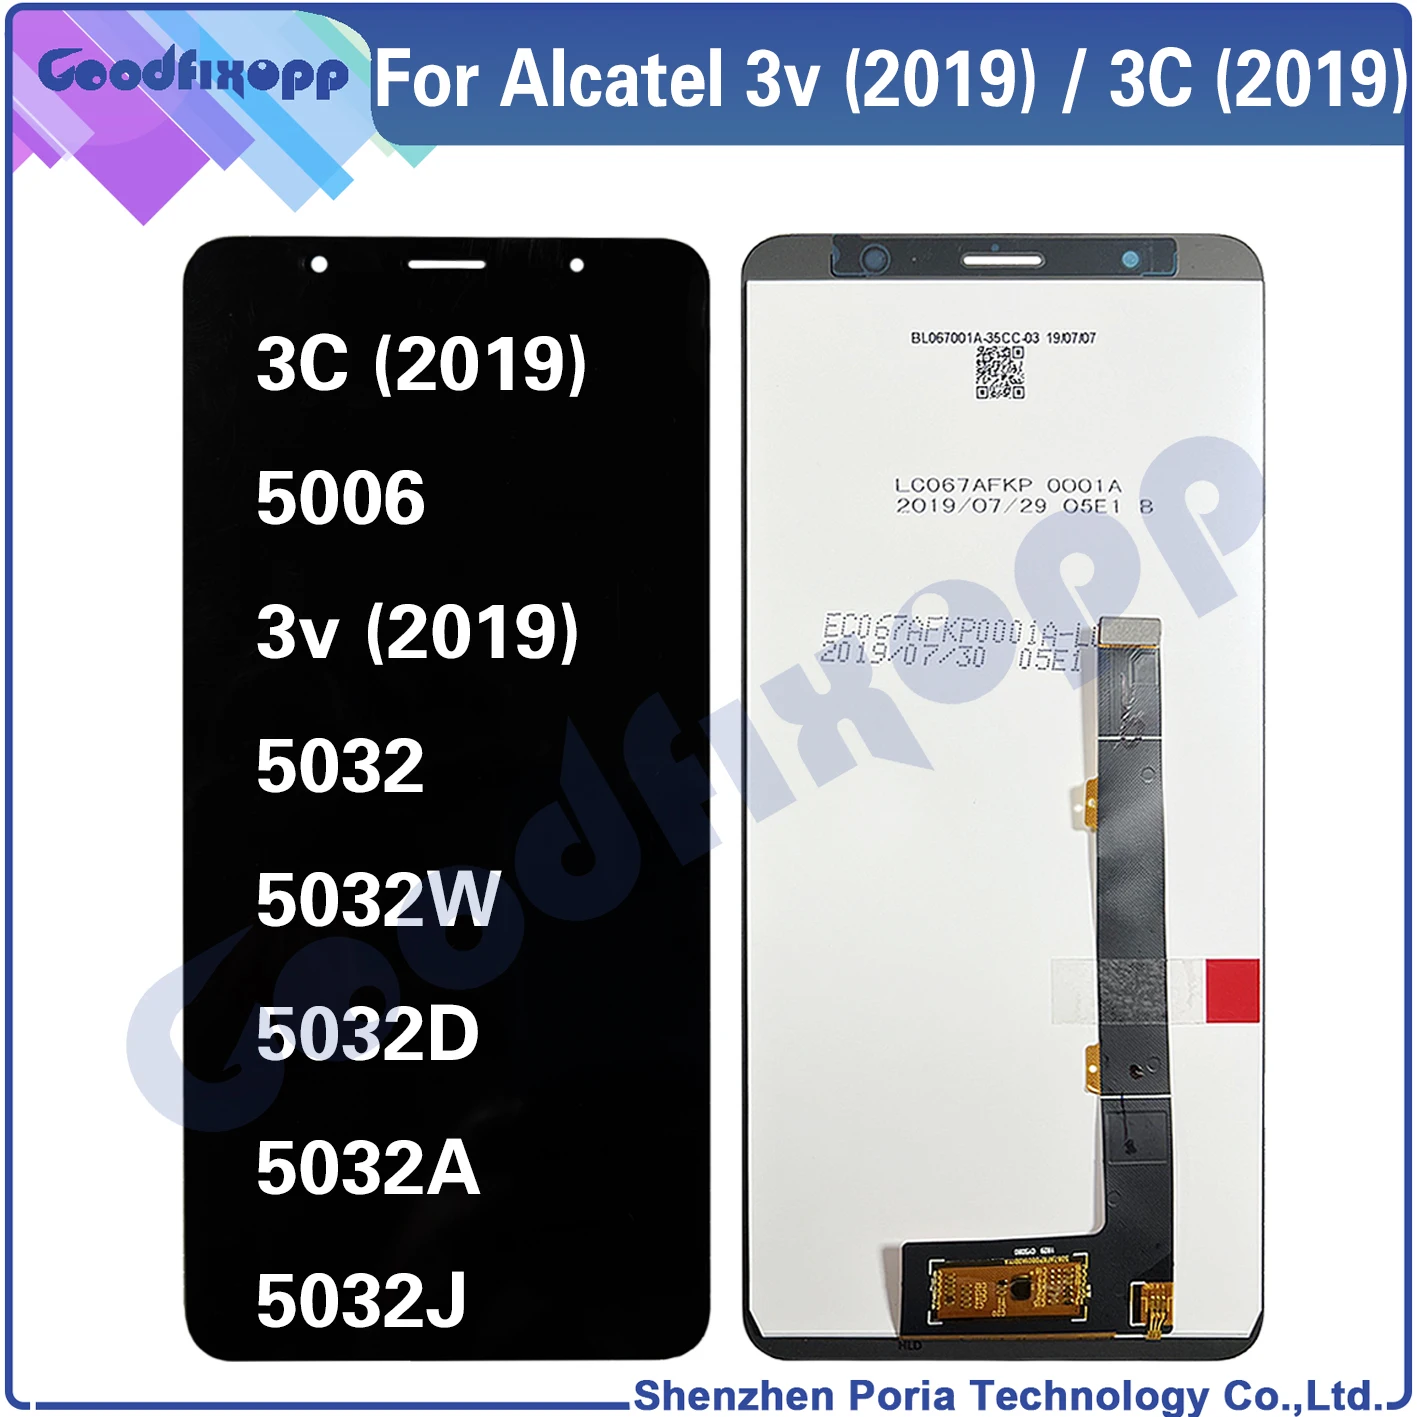 

For Alcatel 3v (2019) 5032 5032W 5032D 5032A 5032J LCD Display Touch Screen Digitizer Assembly For Alcatel 3C (2019) 5006 Screen